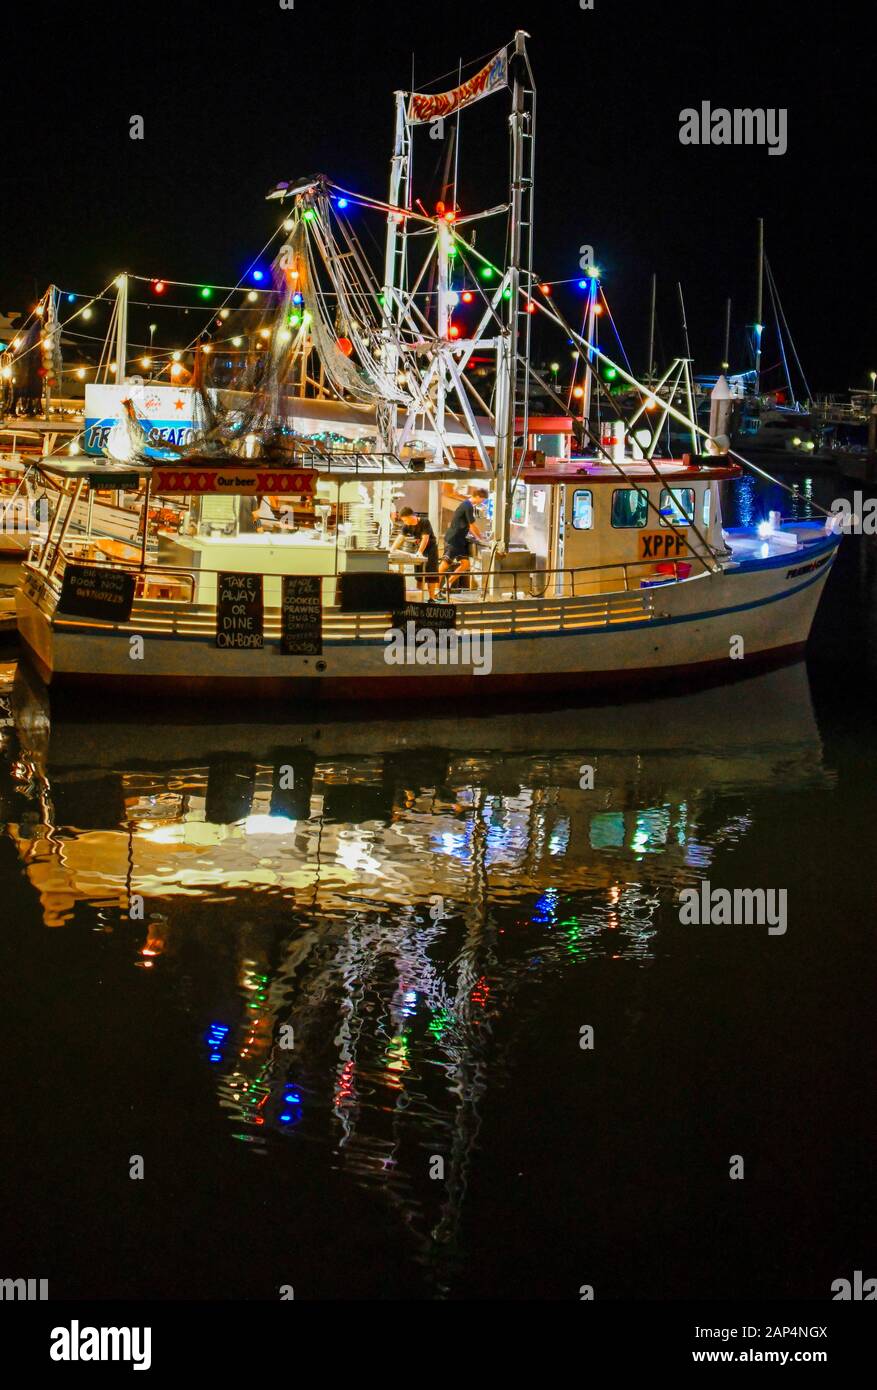 Prawn Star floating seafood restaurant trawler boat, fresh seafood offerings at night with colourful reflections, Cairns Marina, Queensland, Australia Stock Photo